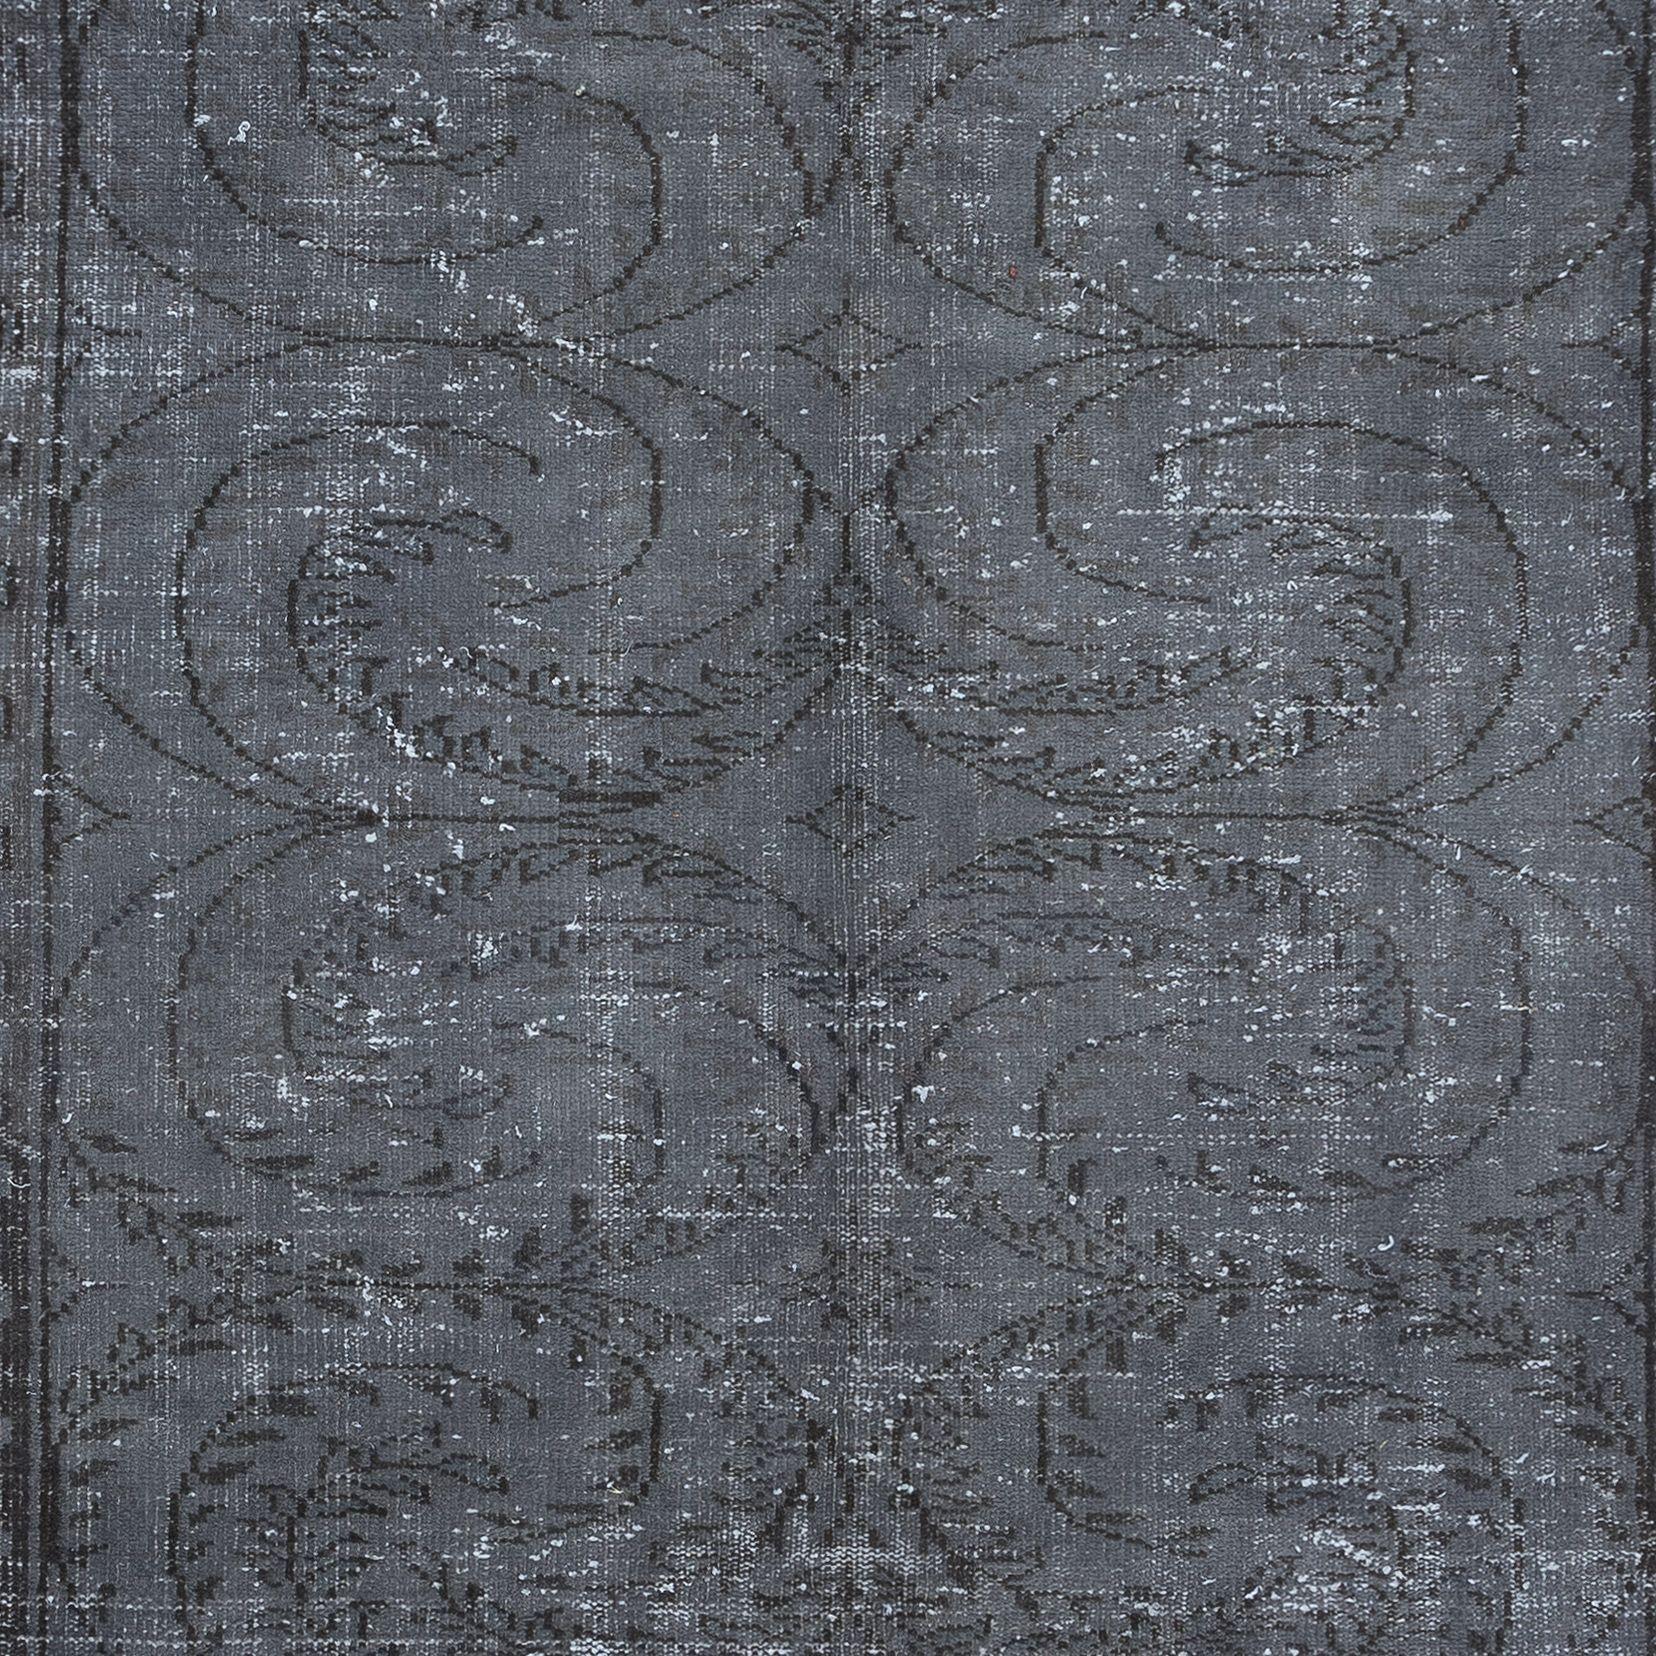 Hand-Woven 6.5x10 Ft Gray Handmade Shabby Chic Rug, Low Pile Carpet from Isparta, Turkey For Sale